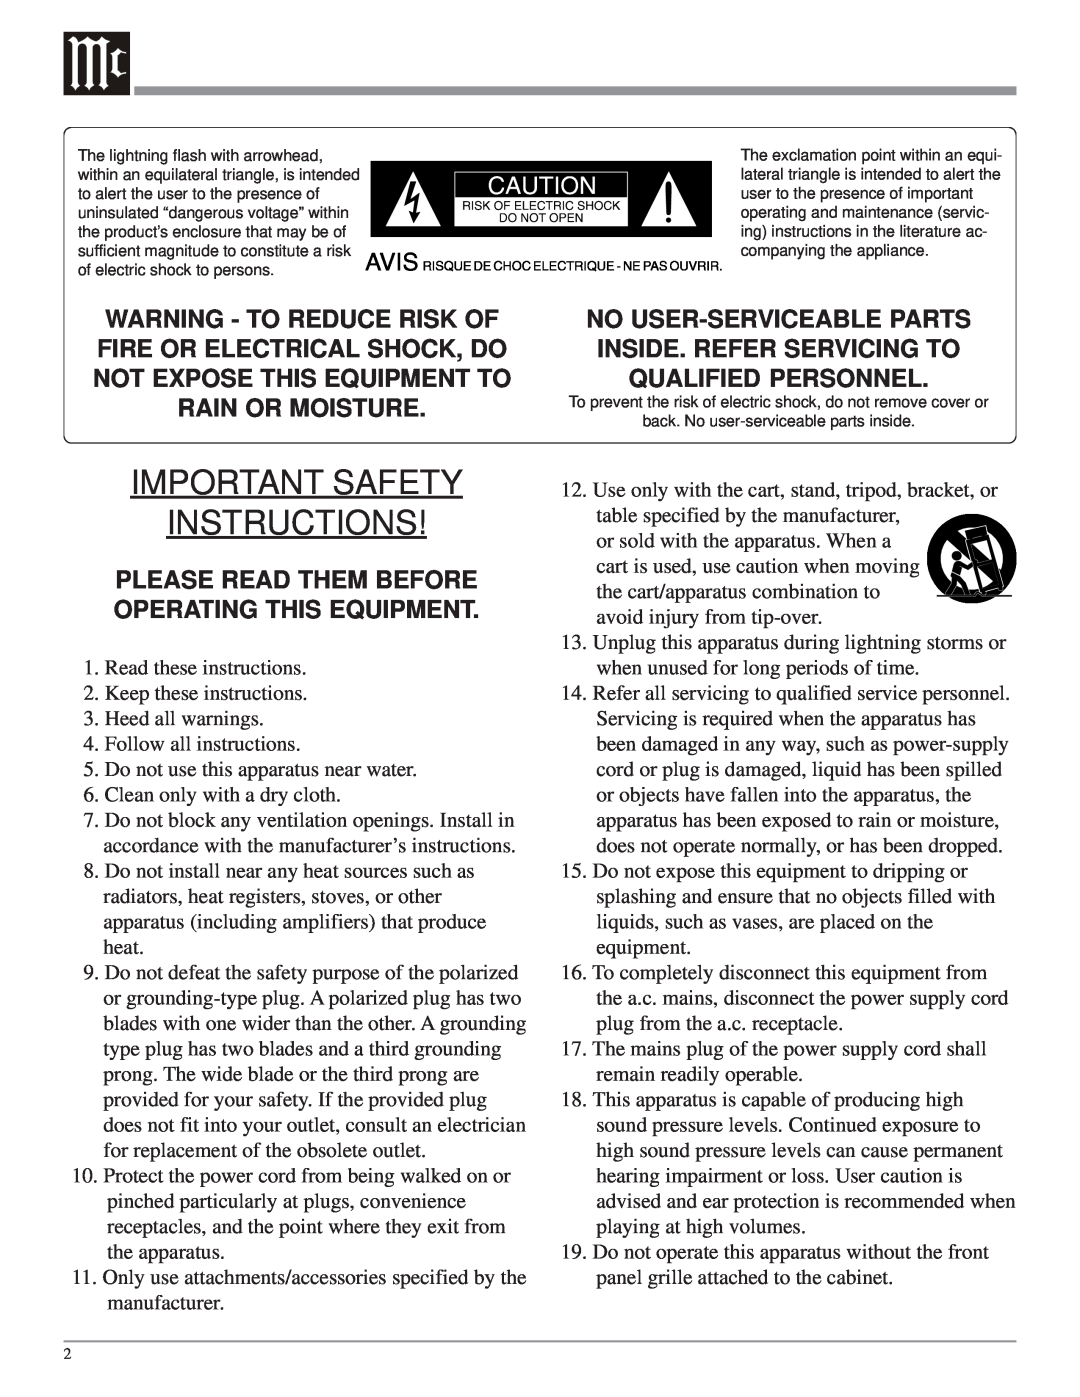 McIntosh XLS112 owner manual Important Safety Instructions, Please Read Them Before Operating This Equipment 